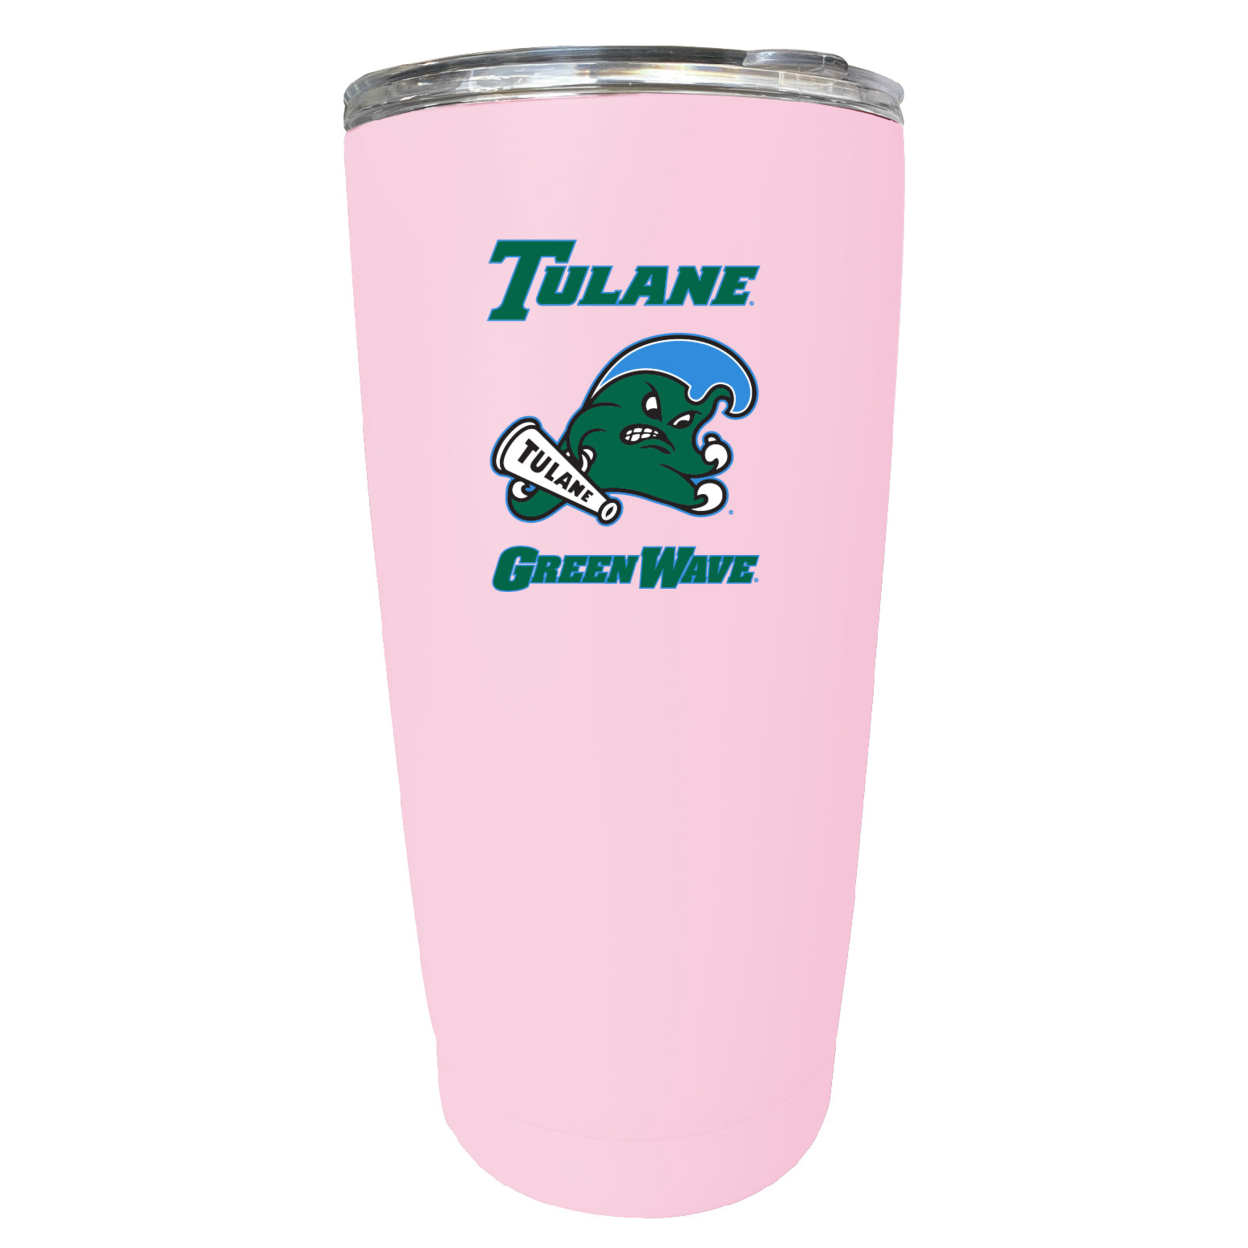 Tulane University Green Wave 16 Oz Stainless Steel Insulated Tumbler - Pink